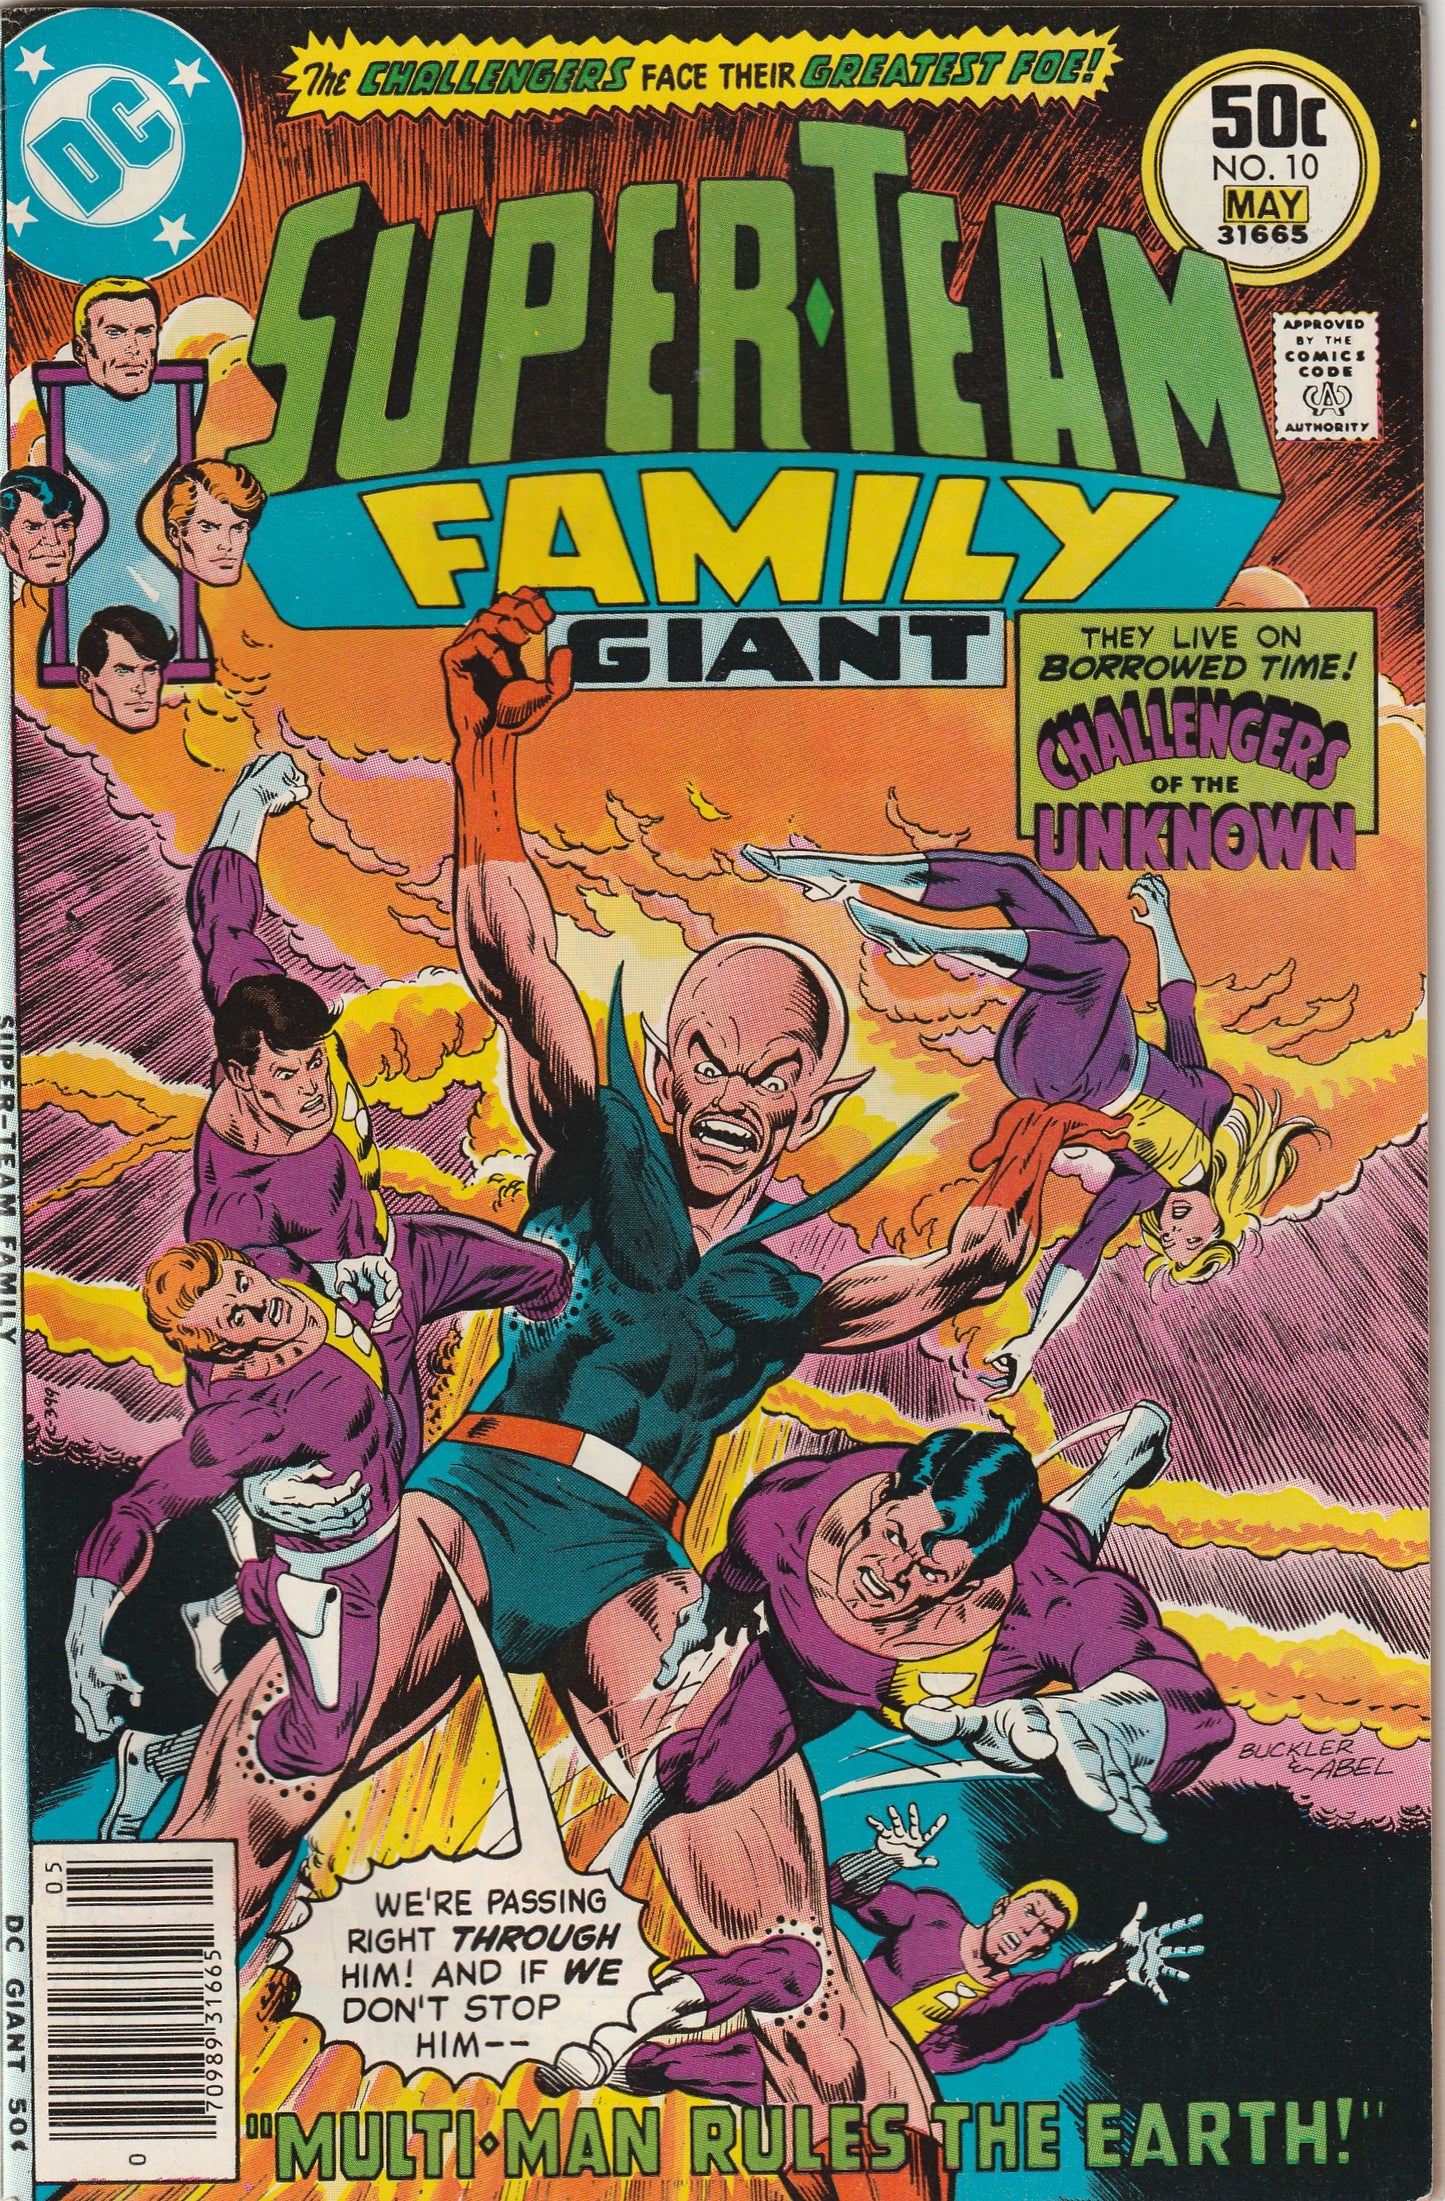 Super-Team Family #10 (1977) Giant - Featuring Challengers of the Unknown